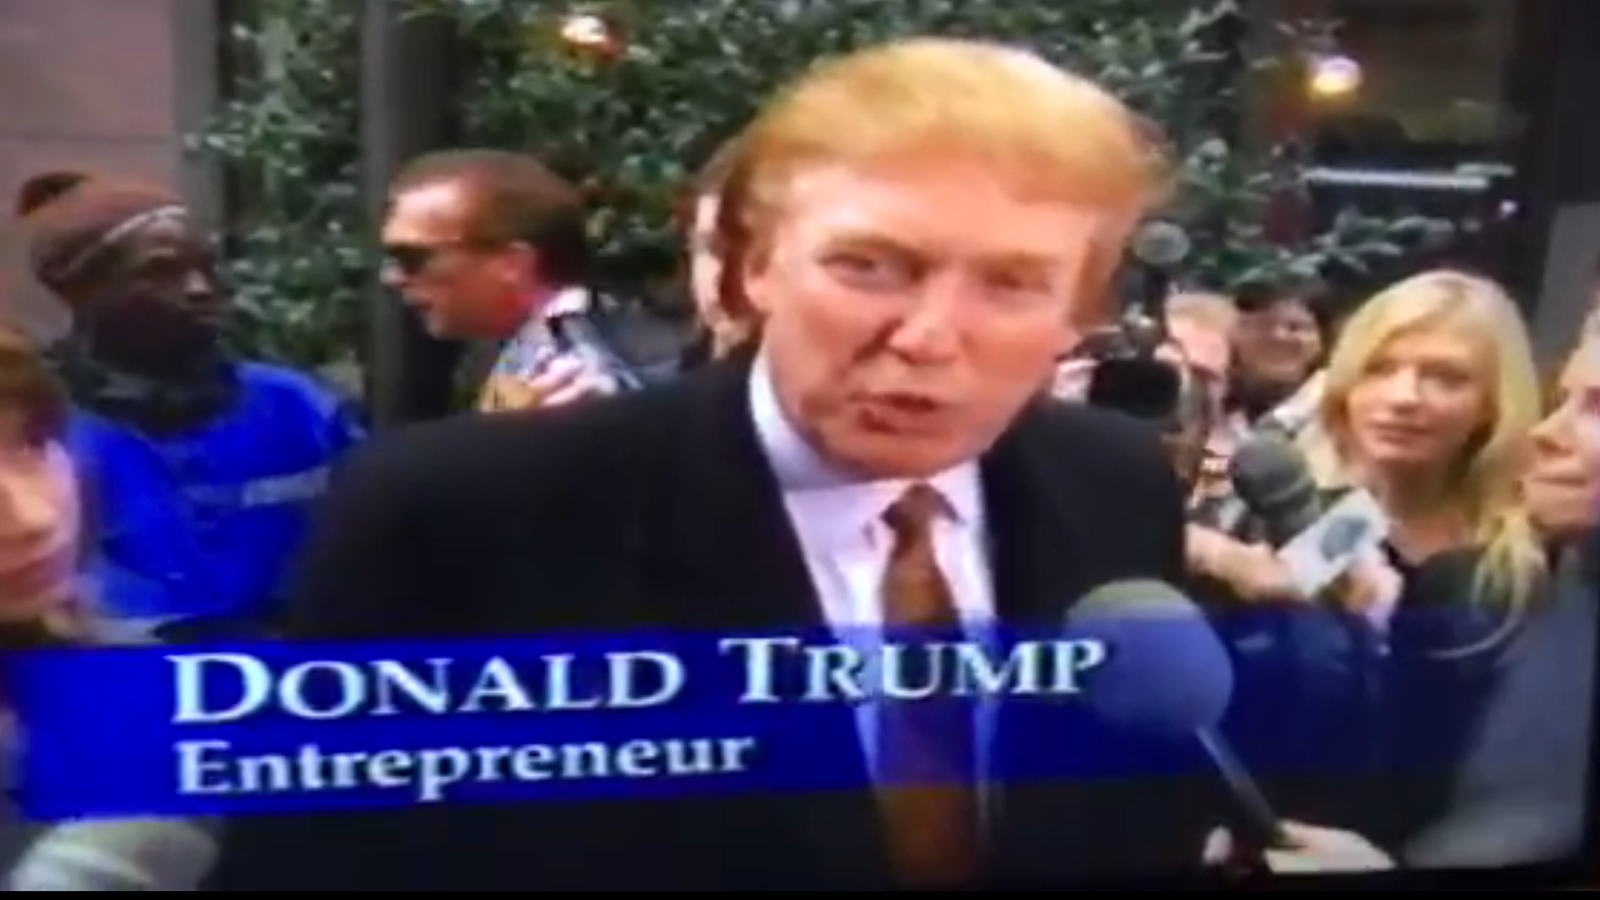 Trump Appeared in a 2000 Softcore Porn Video Featuring Women ...